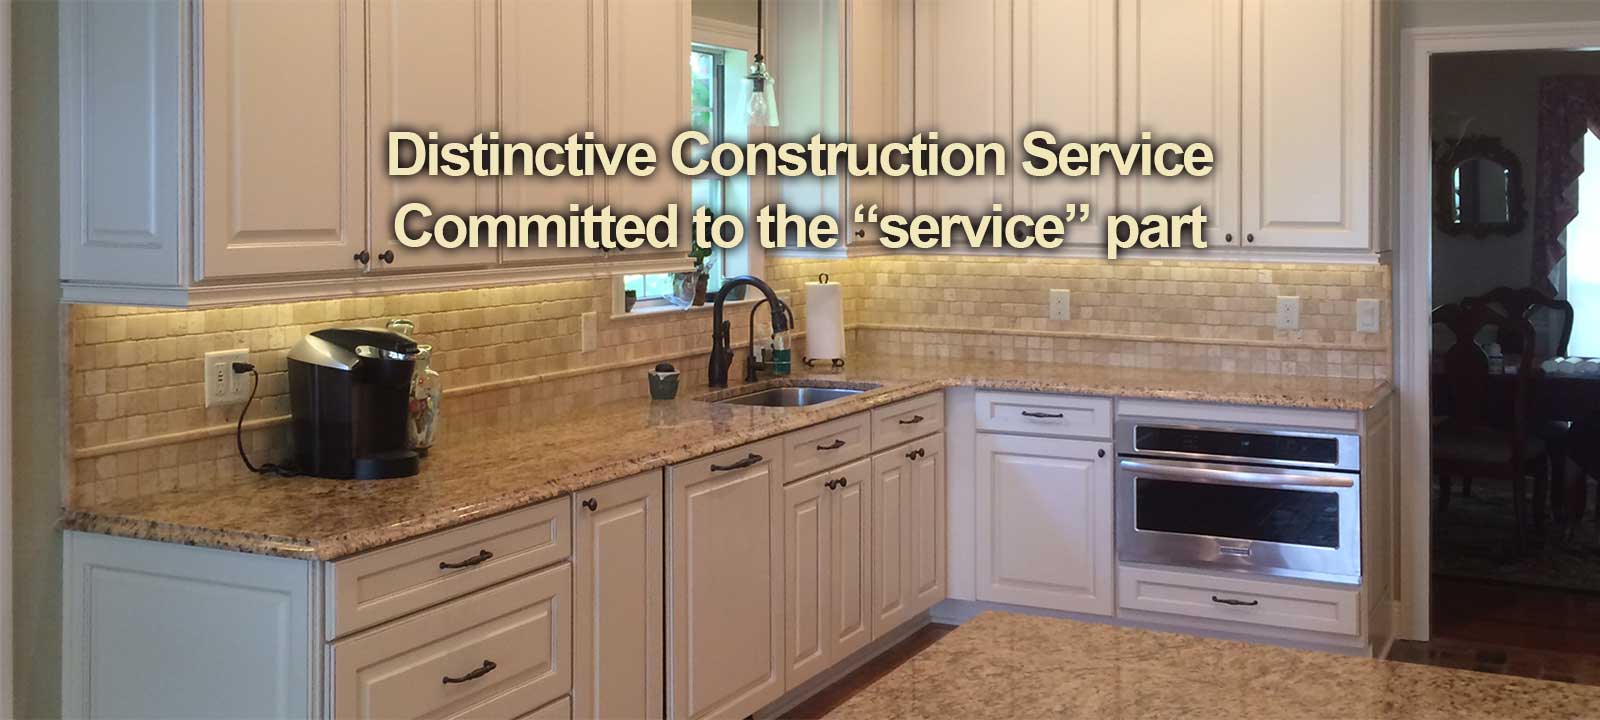 Home construction and remodeling service